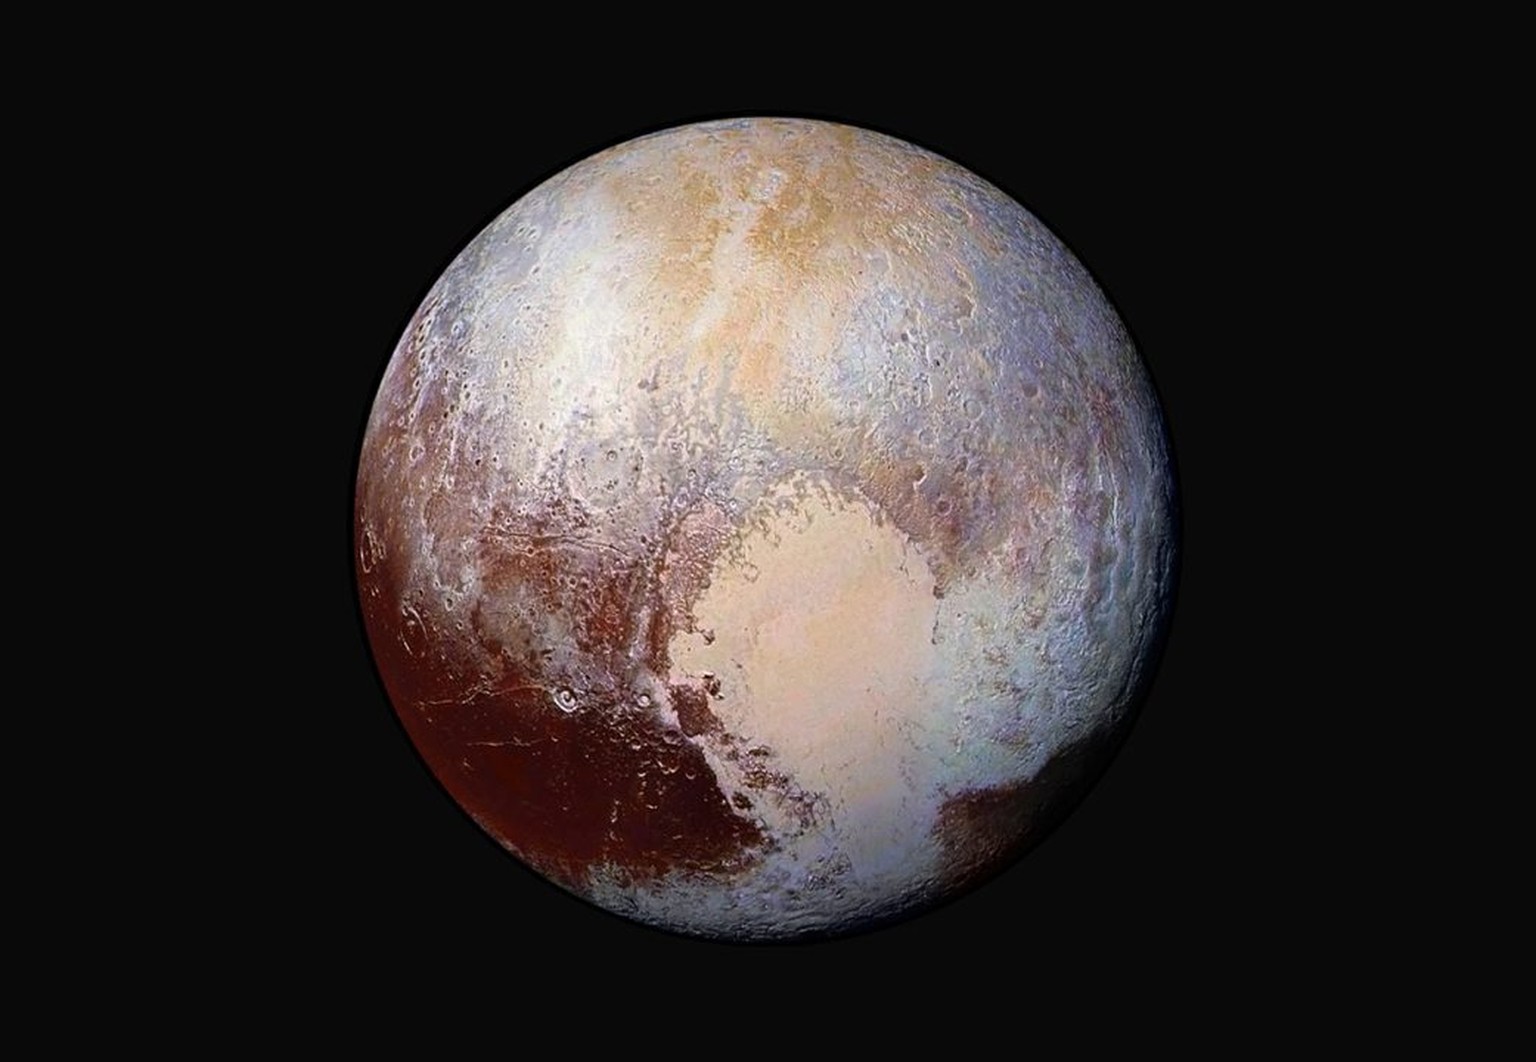 epa04859034 A handout image provided by NASA on 24 July 2015 shows the dwarf planet Pluto in enhanced color. New Horizons scientists used enhanced color images to detect differences in the composition ...